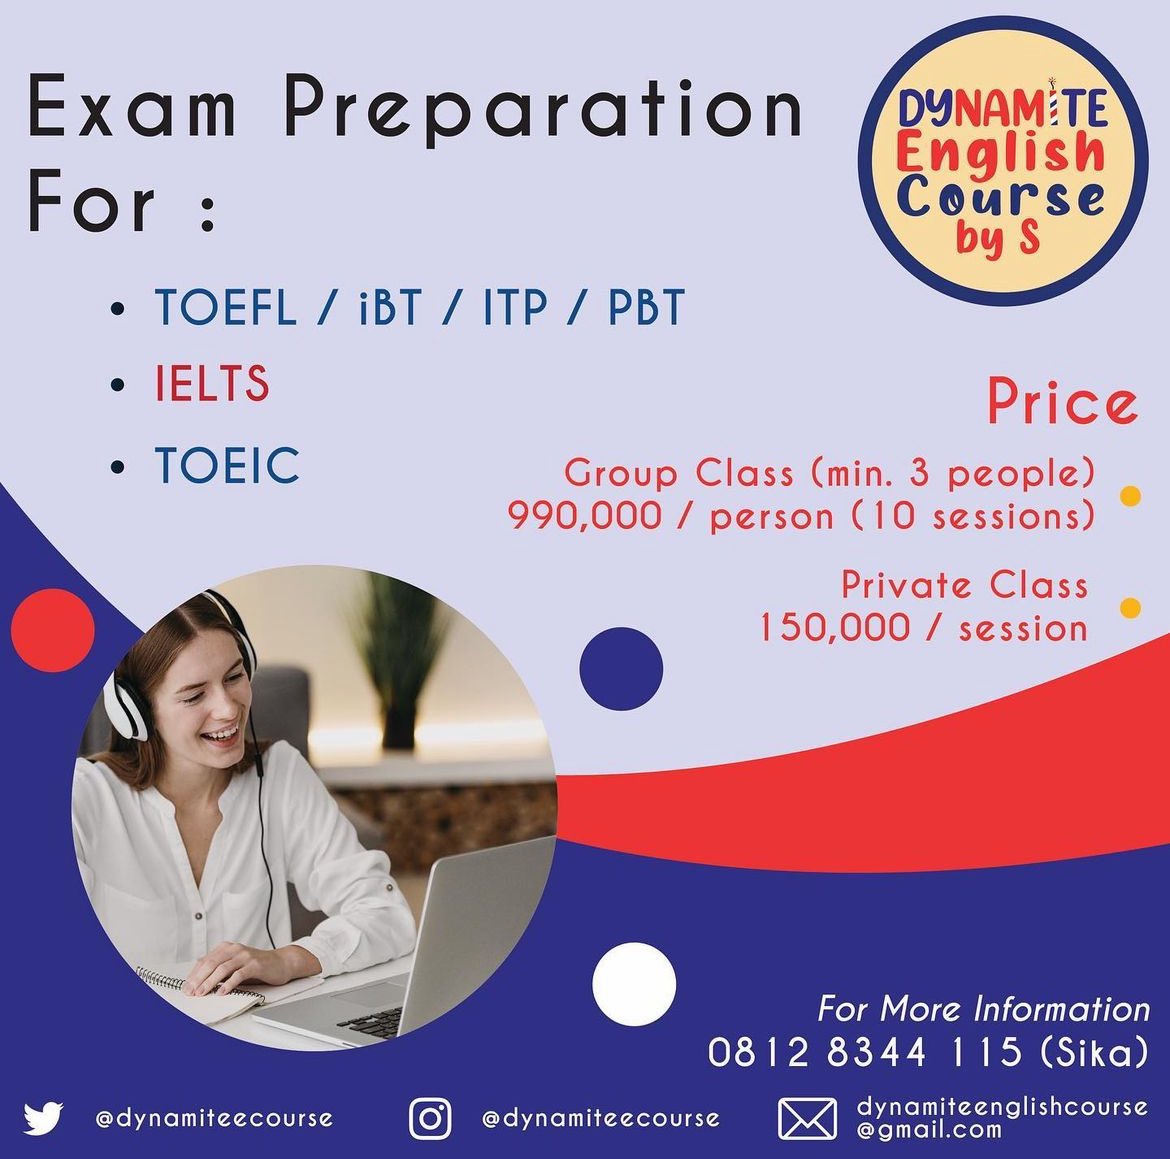 We are now open classes for exam preparation such as  

TOEFL IBT, TOEFL ITP/PBT, TOEIC and IELTS for Online and offline learning

#dynamiteenglishcourse #studyathome #onlinecourse #dynamite #English #toefl #IELTS #TOEIC #studyathome #belajardirumah #English #englishcourse